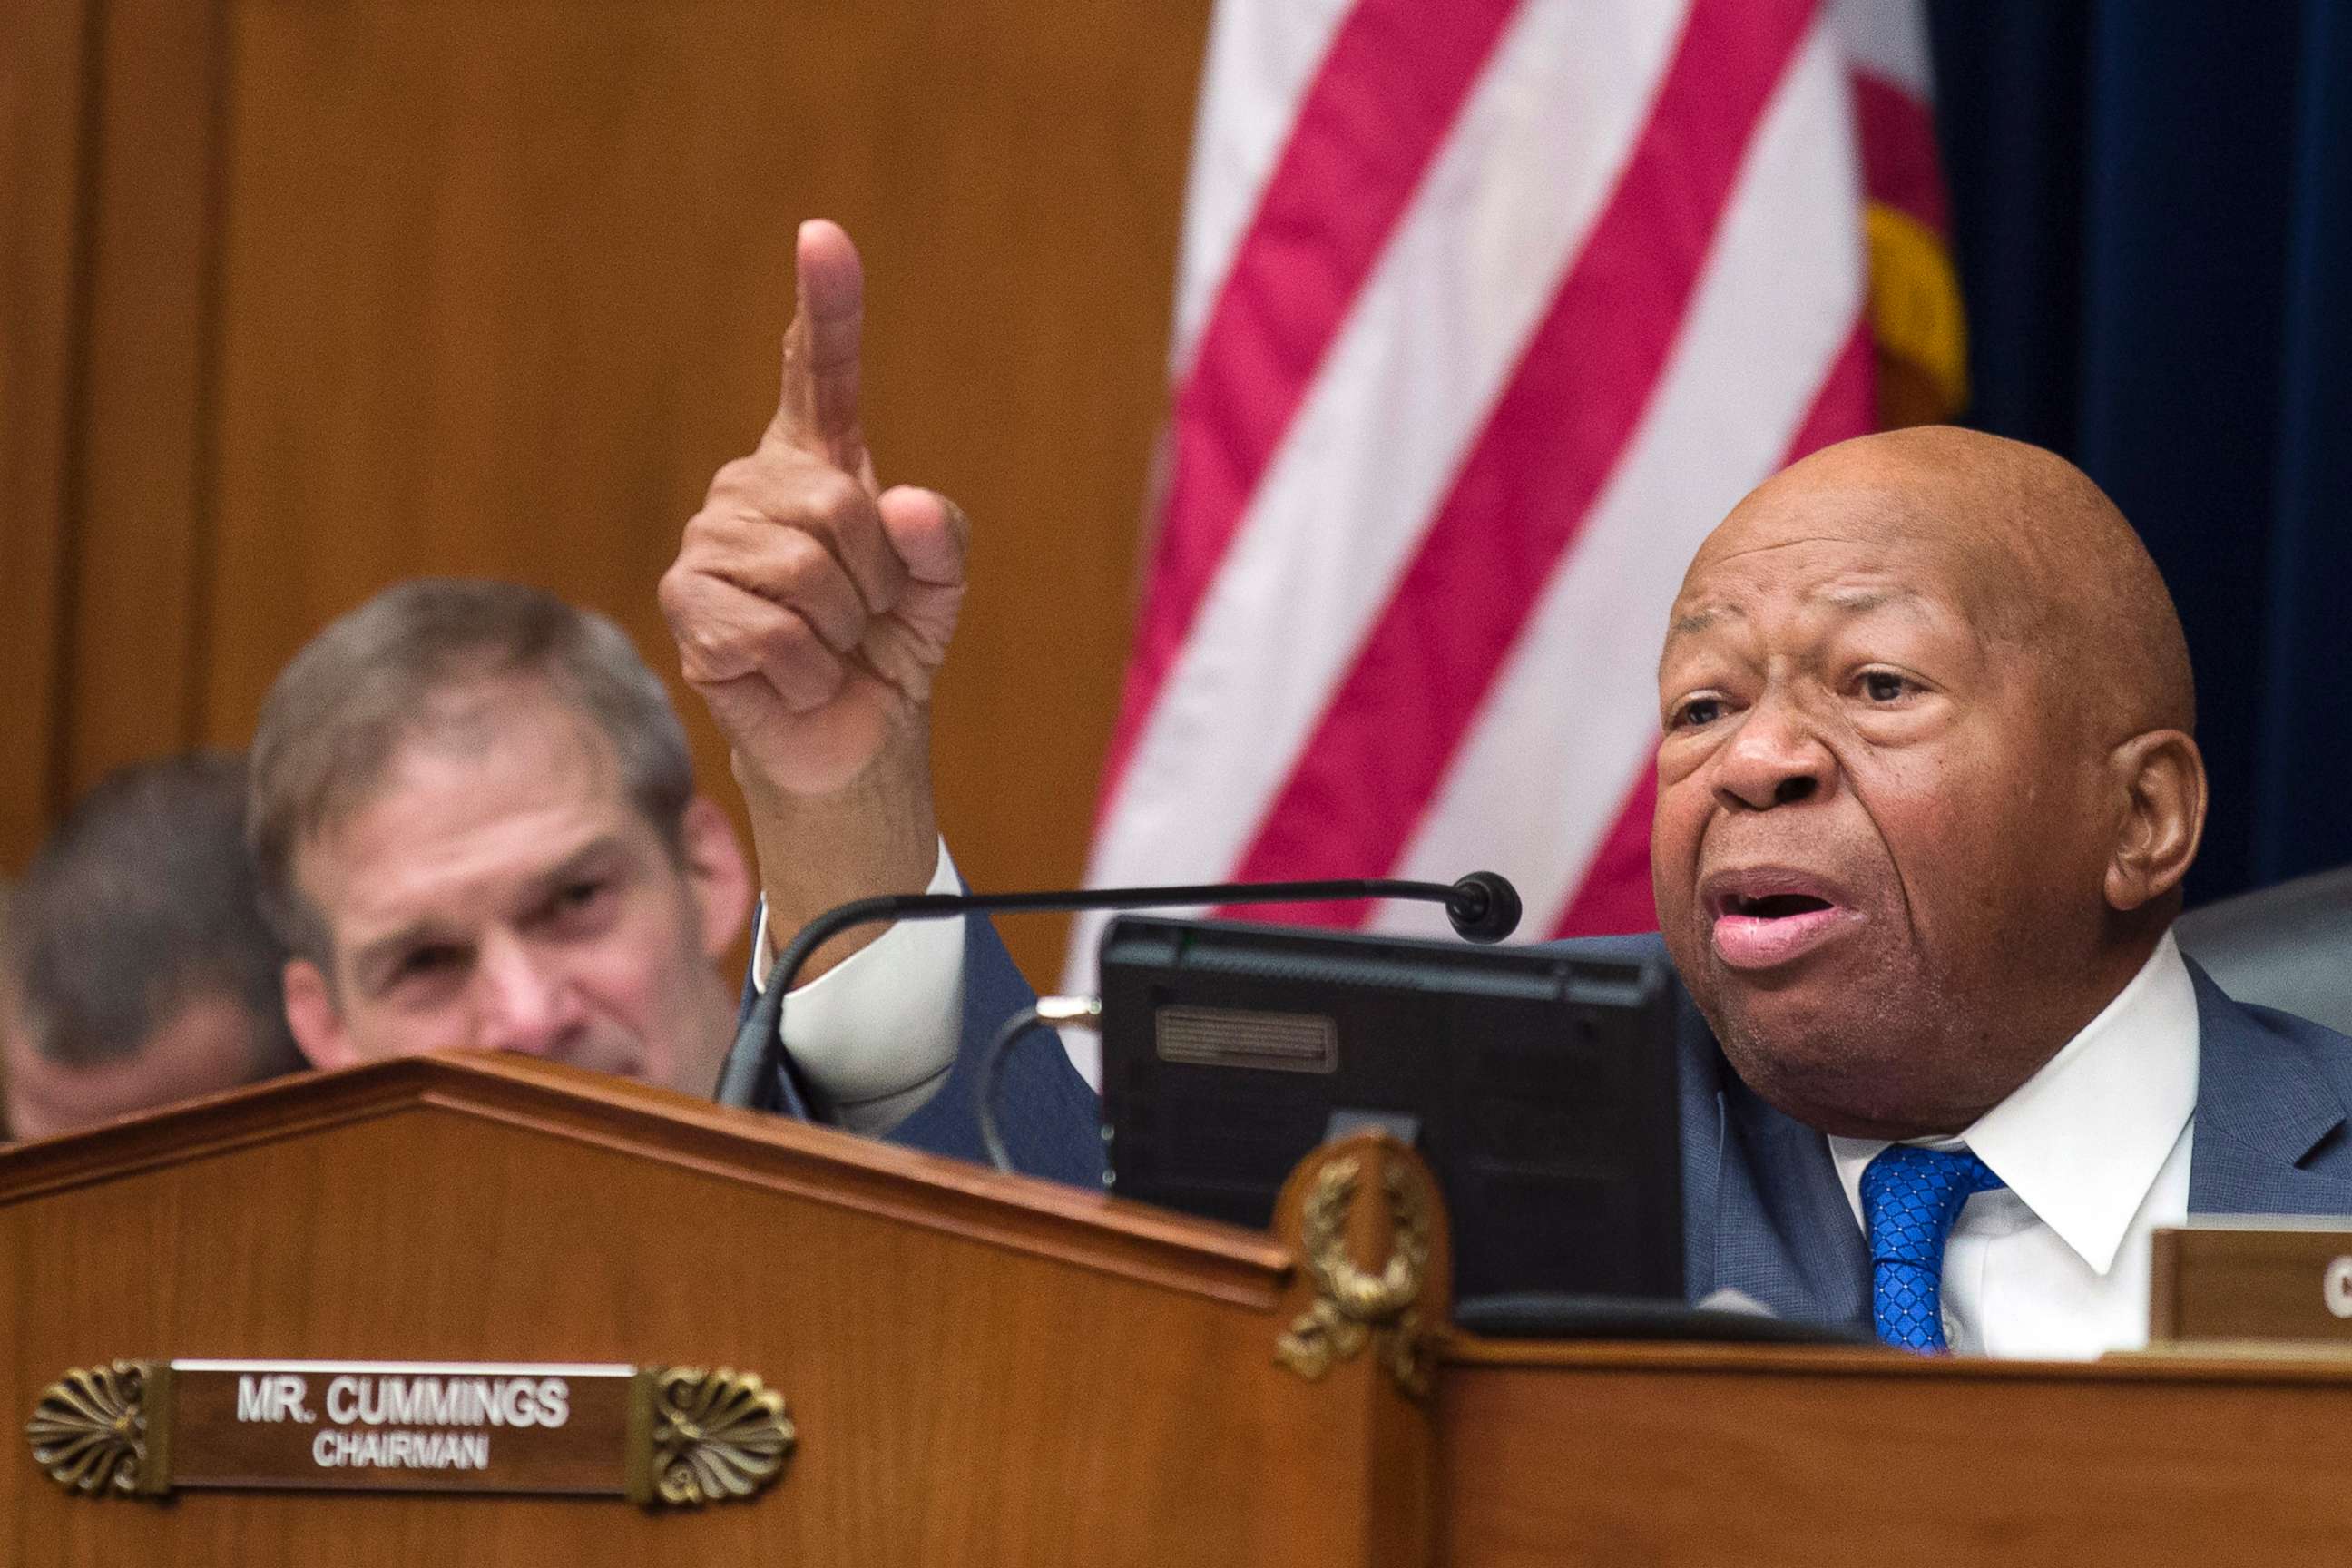 PHOTO: House Oversight and Reform Committee Chair Elijah Cummings gives closing remarks as Rep. Jim Jordan, left, listens, following the testimony of Michael Cohen, at the House Oversight and Reform Committee on Capitol Hill, Feb. 27, 2019.